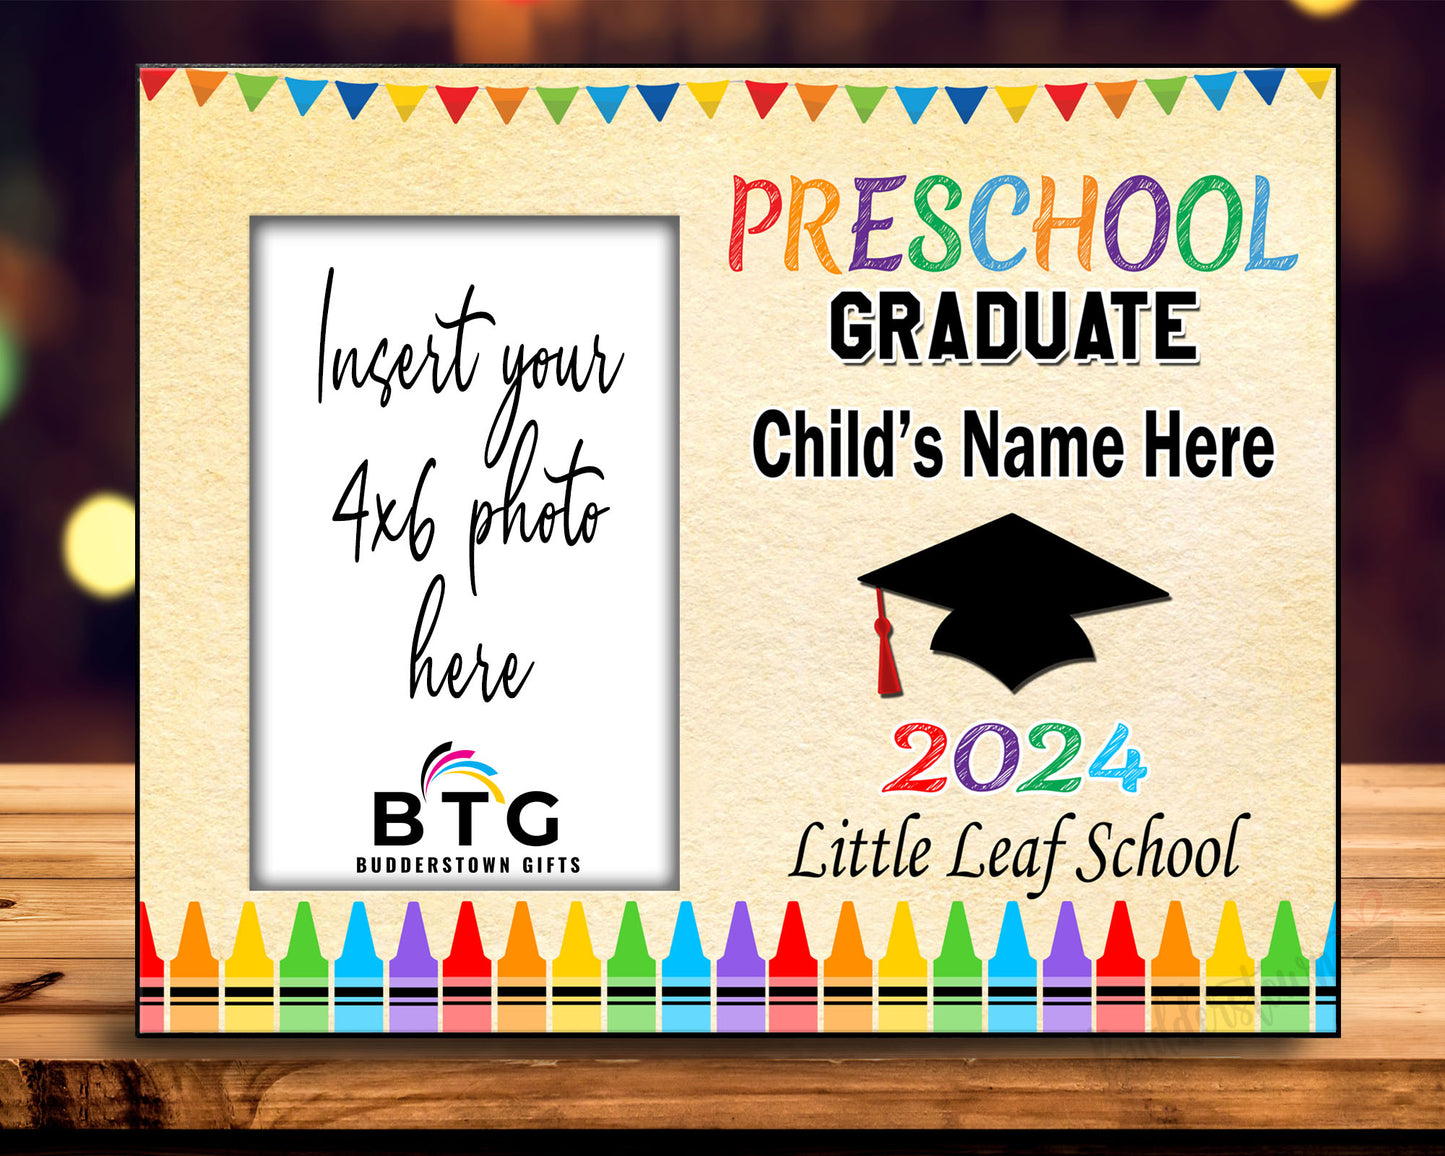 Preschool Graduate Personalized Graduation Frame.

This heartfelt 8x10 wood Photo Frame is the perfect way to commemorate this significant milestone. It holds an actual 4x6 photo, allowing you to capture your little one's adorable smile on their big day.